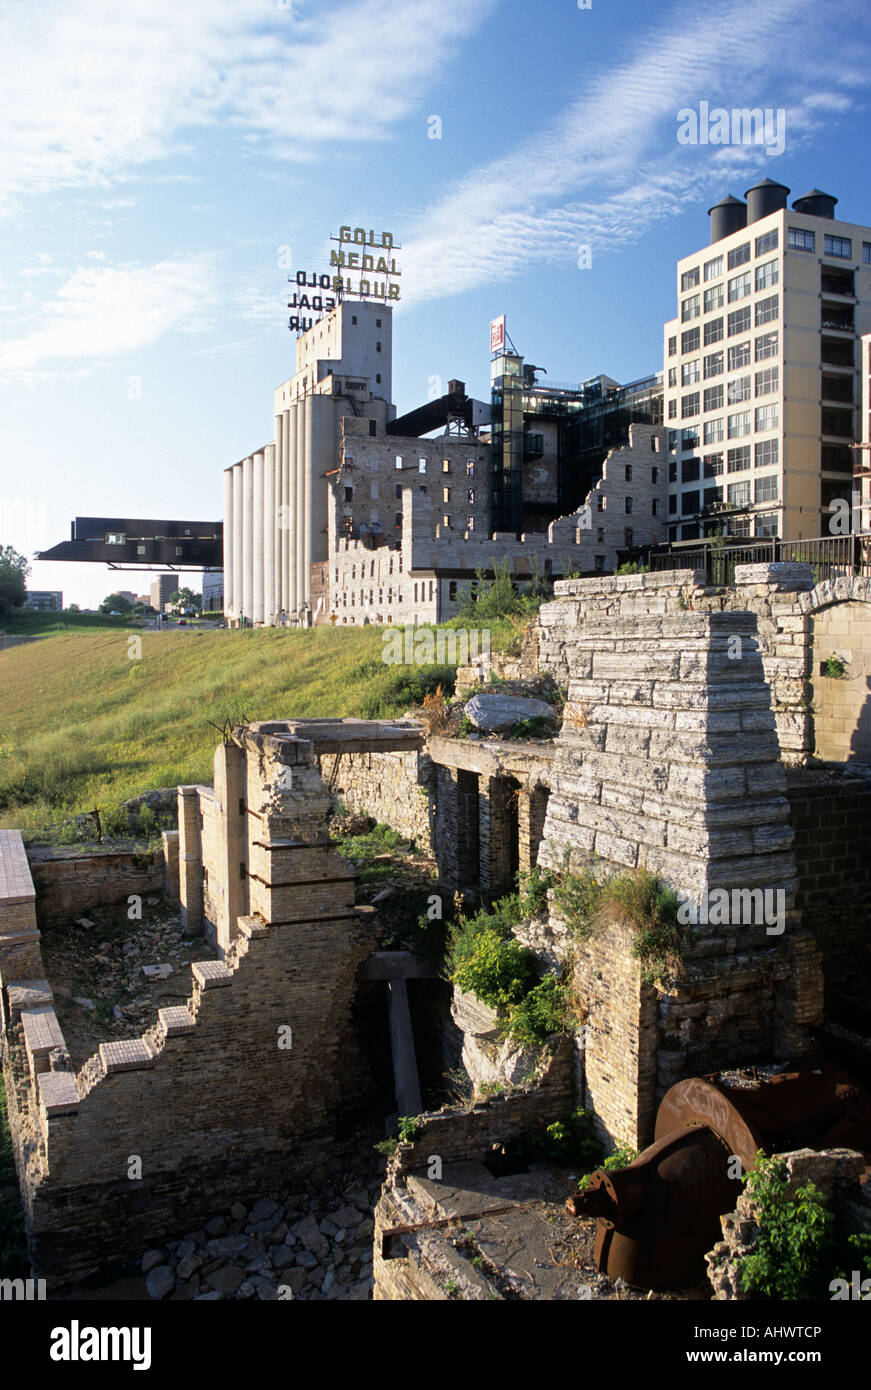 MILL RUINS PARK IN DOWNTOWN MINNEAPOLIS AND MILL CITY MUSEUM. ST. ANTHONY FALLS HISTORIC DISTRICT, MISSISSIPPI RIVERFRONT AREA. Stock Photo